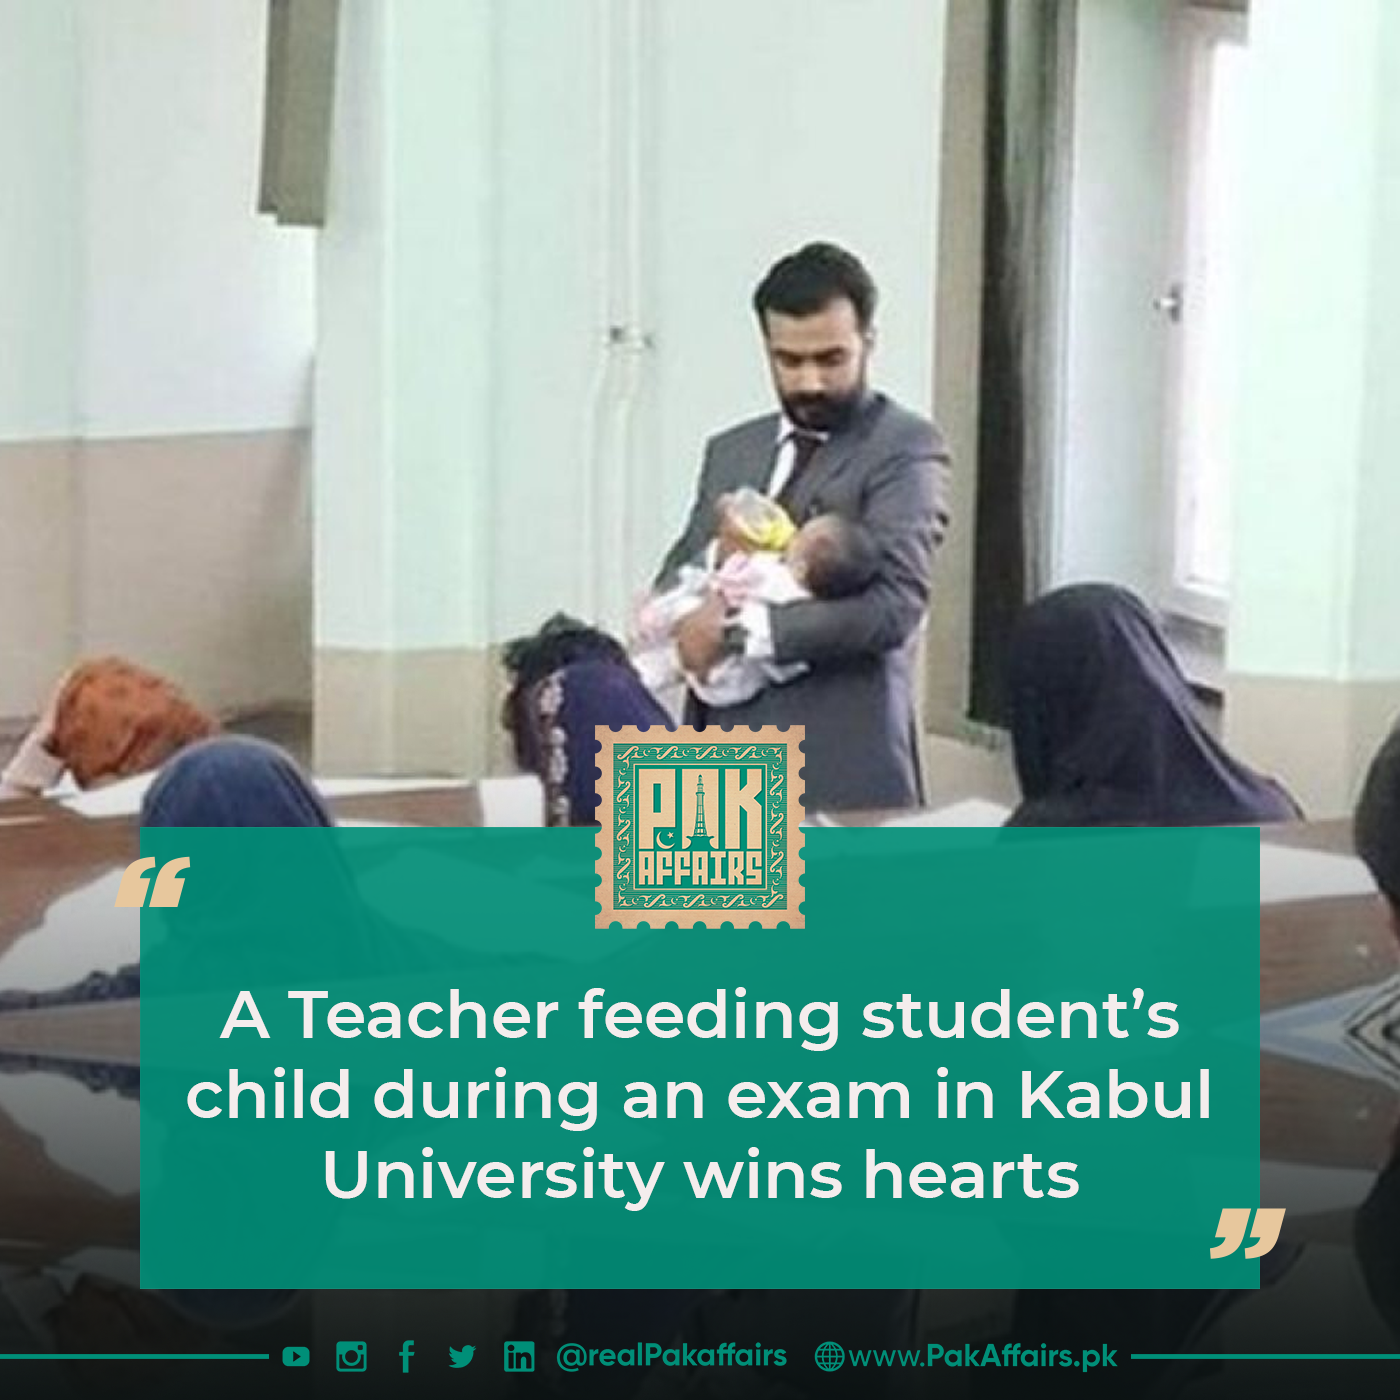 A Teacher feeding student’s child during an exam in Kabul University wins hearts